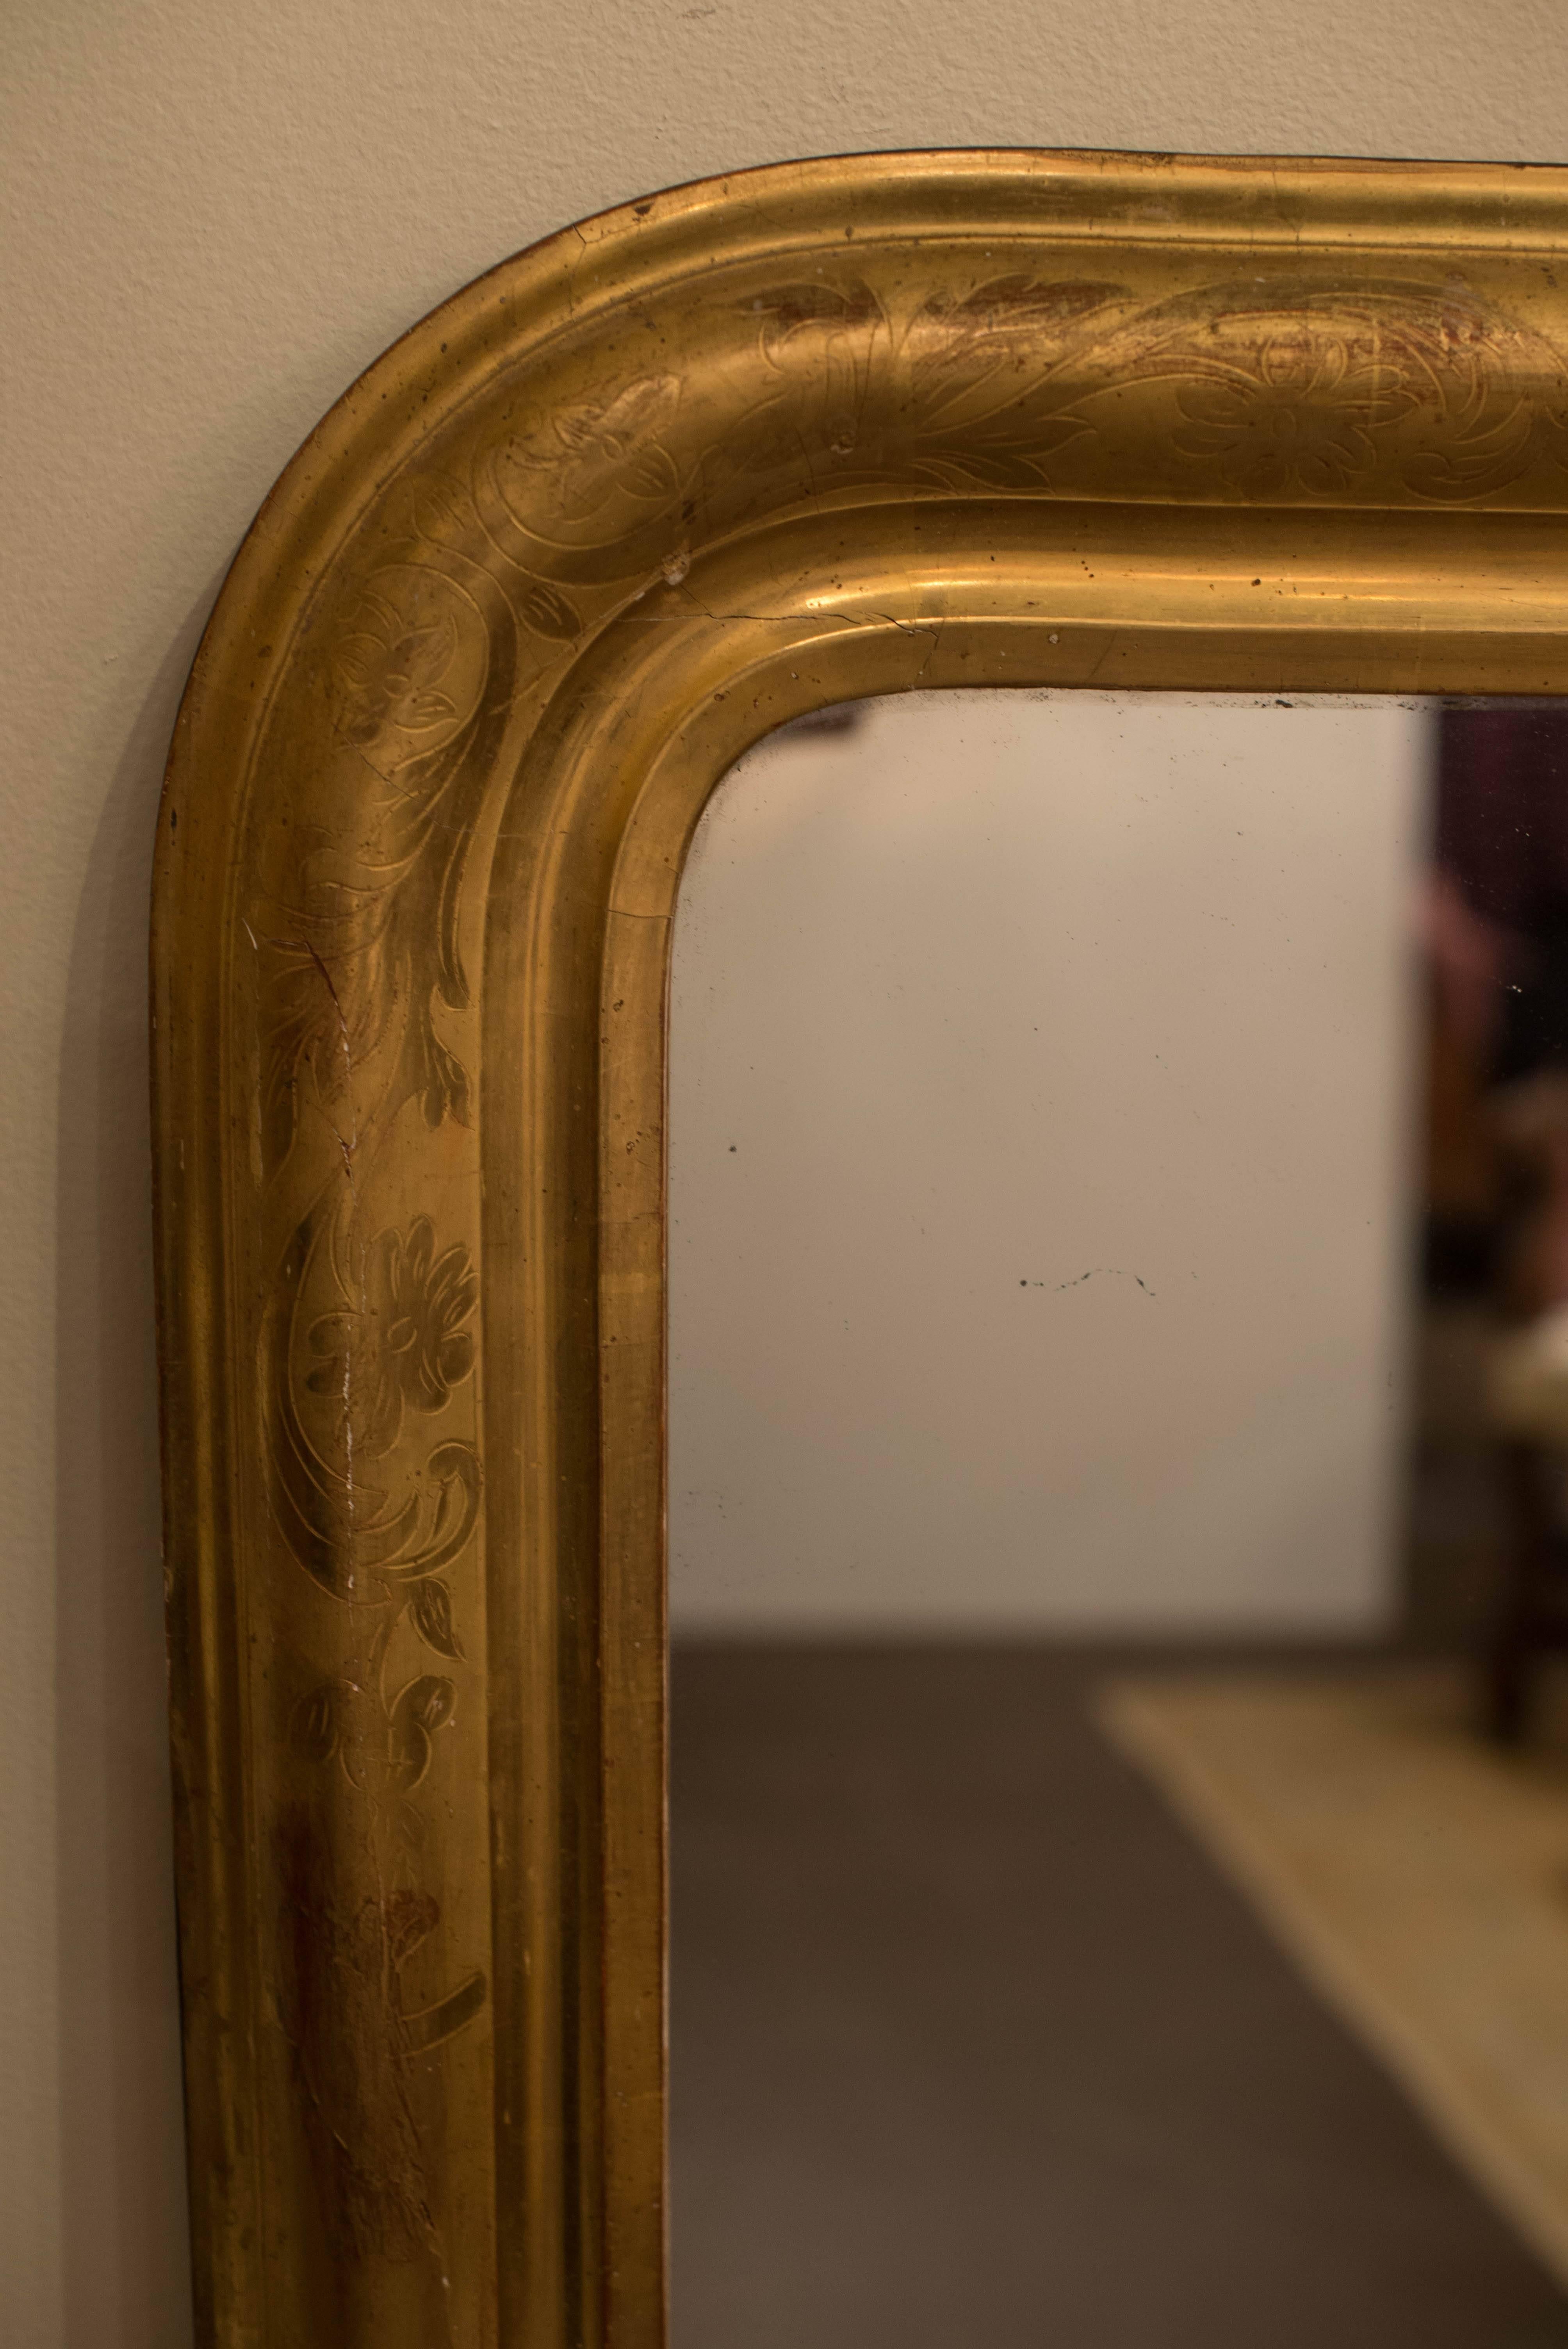 This Louis Philippe Giltwood Mirror features a moulded surround with a lovely foliate design.